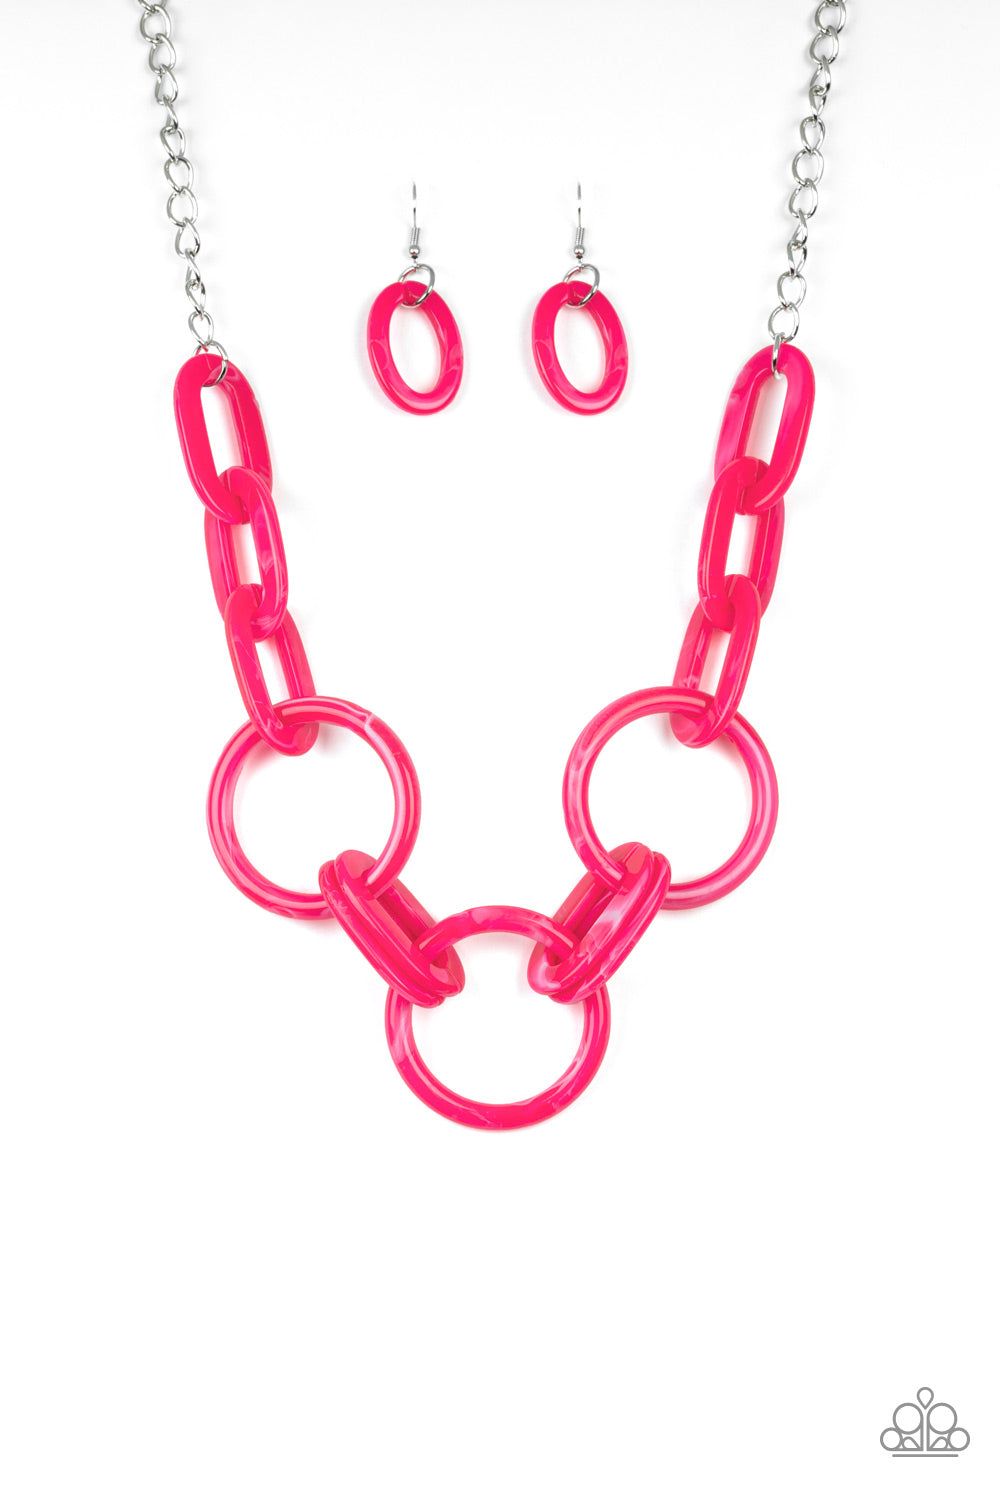 TURN UP THE HEAT - PINK ACRYLIC NECKLACE